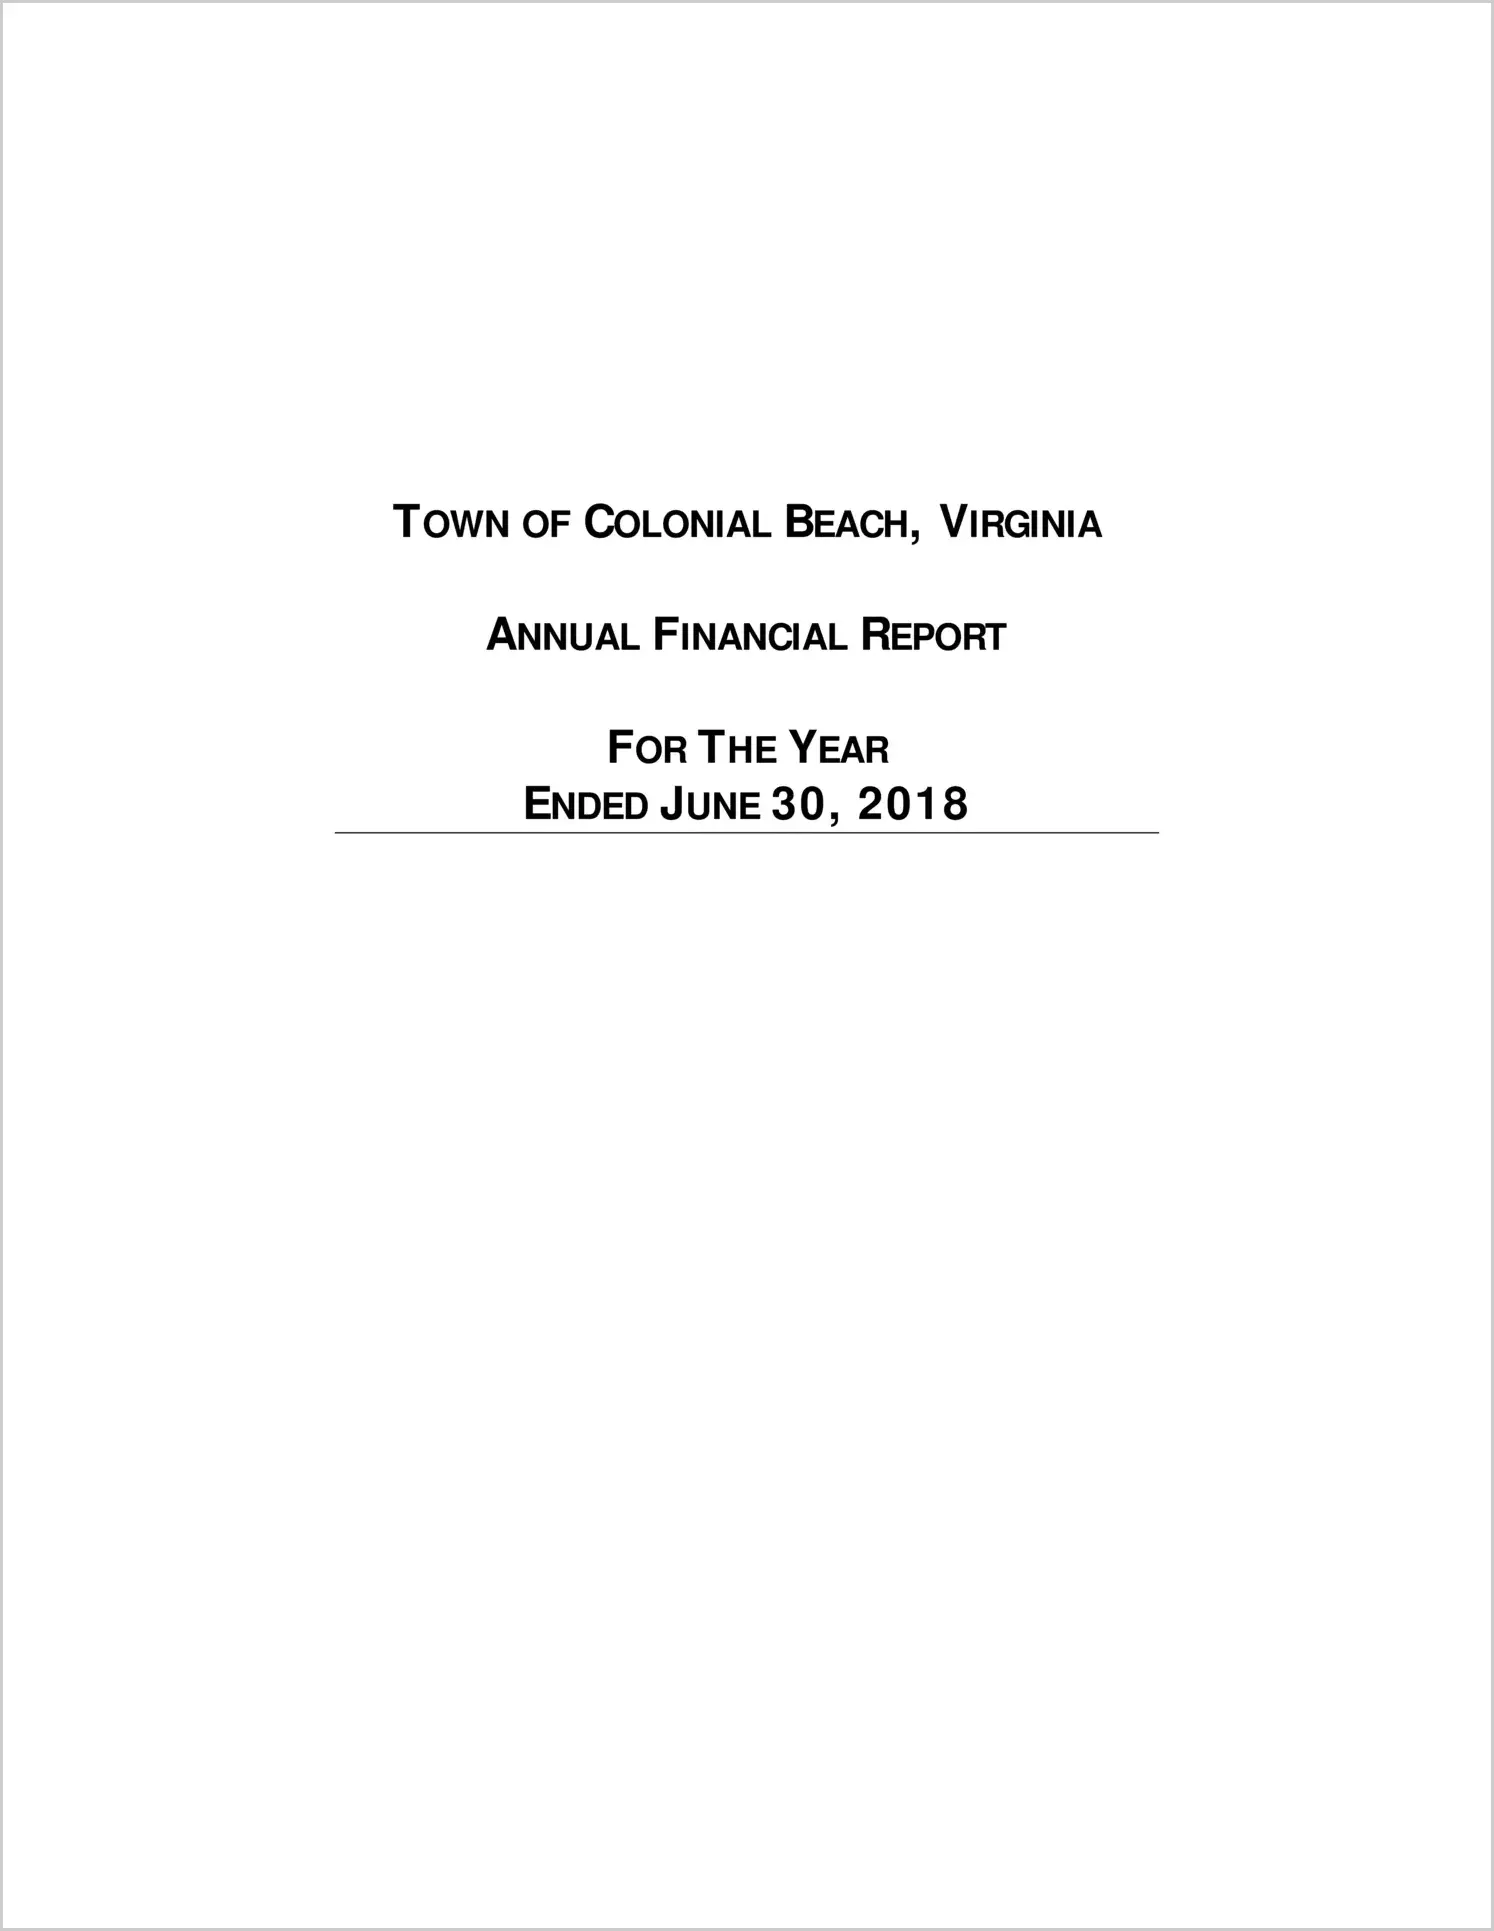 2018 Annual Financial Report for Town of Colonial Beach